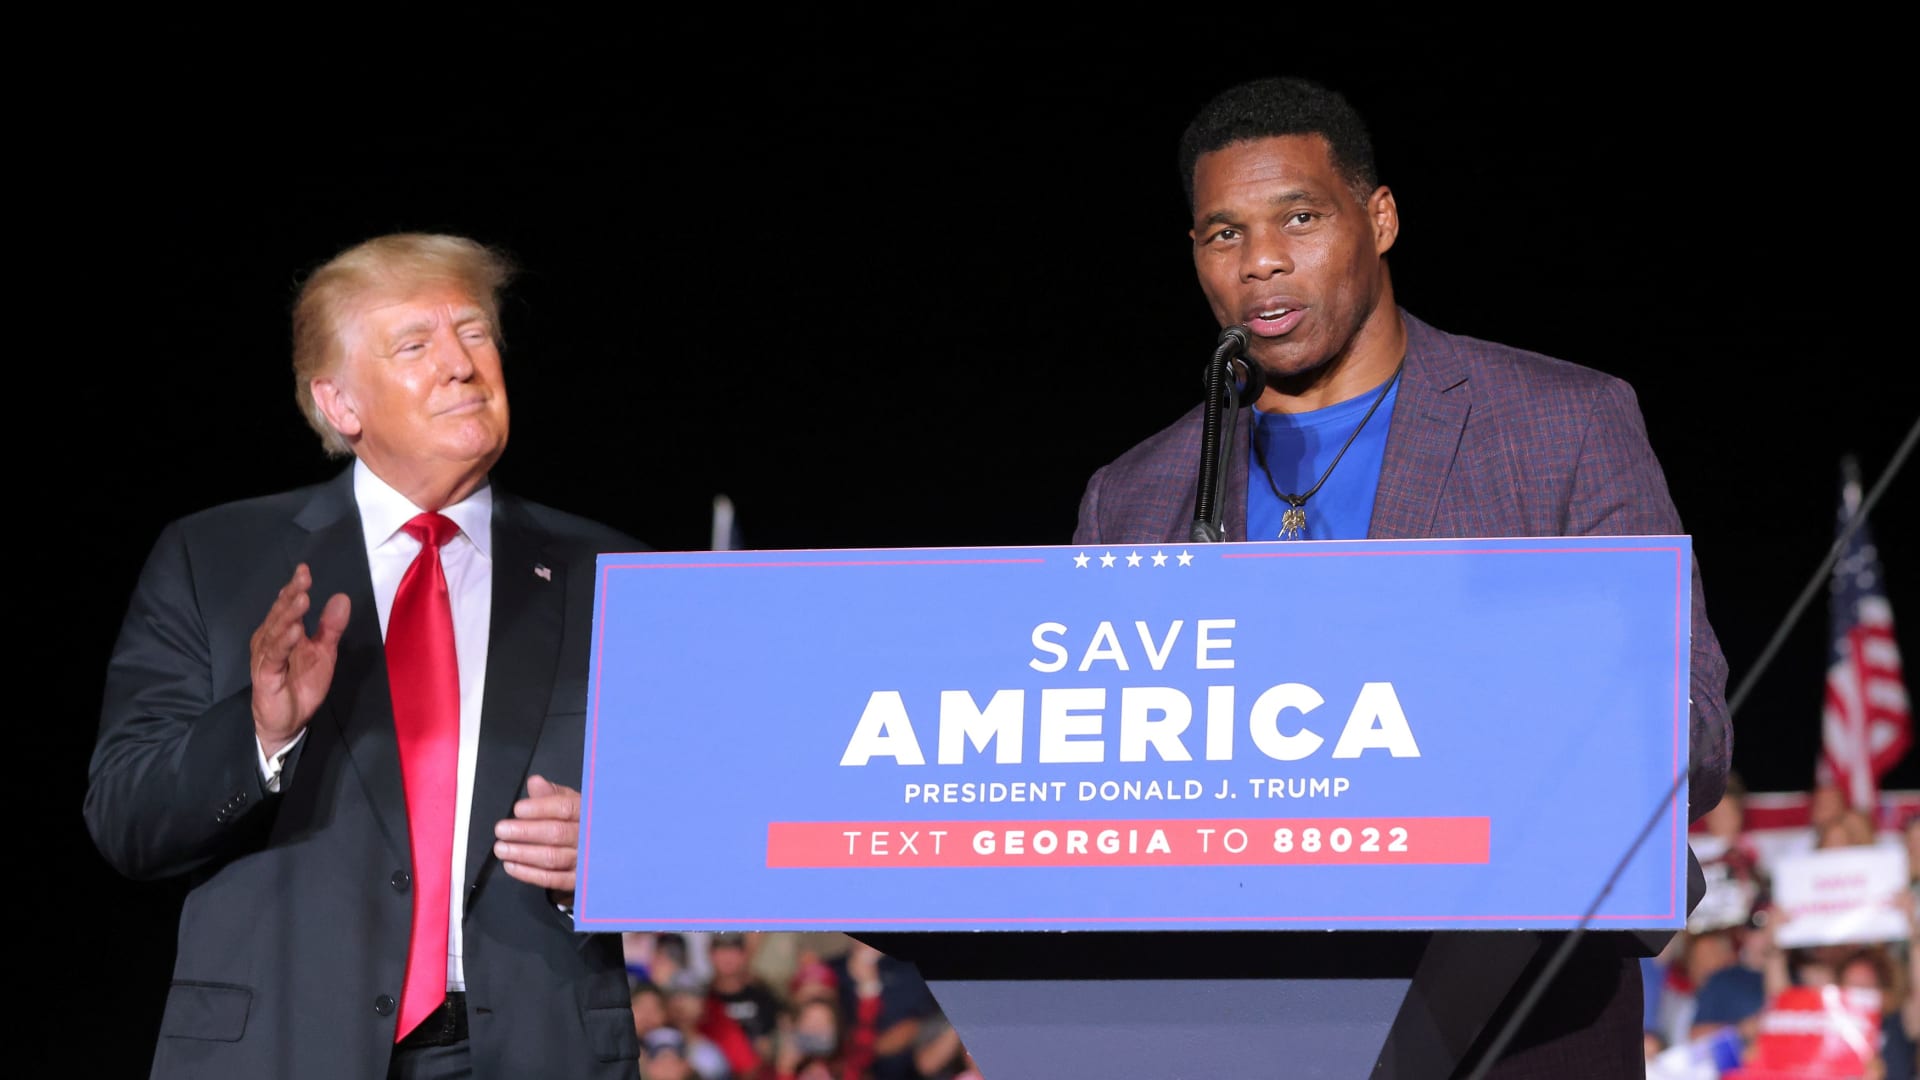 Georgia Senate GOP candidate Herschel Walker denies paying for abortion — son says he ‘threatened to kill us’